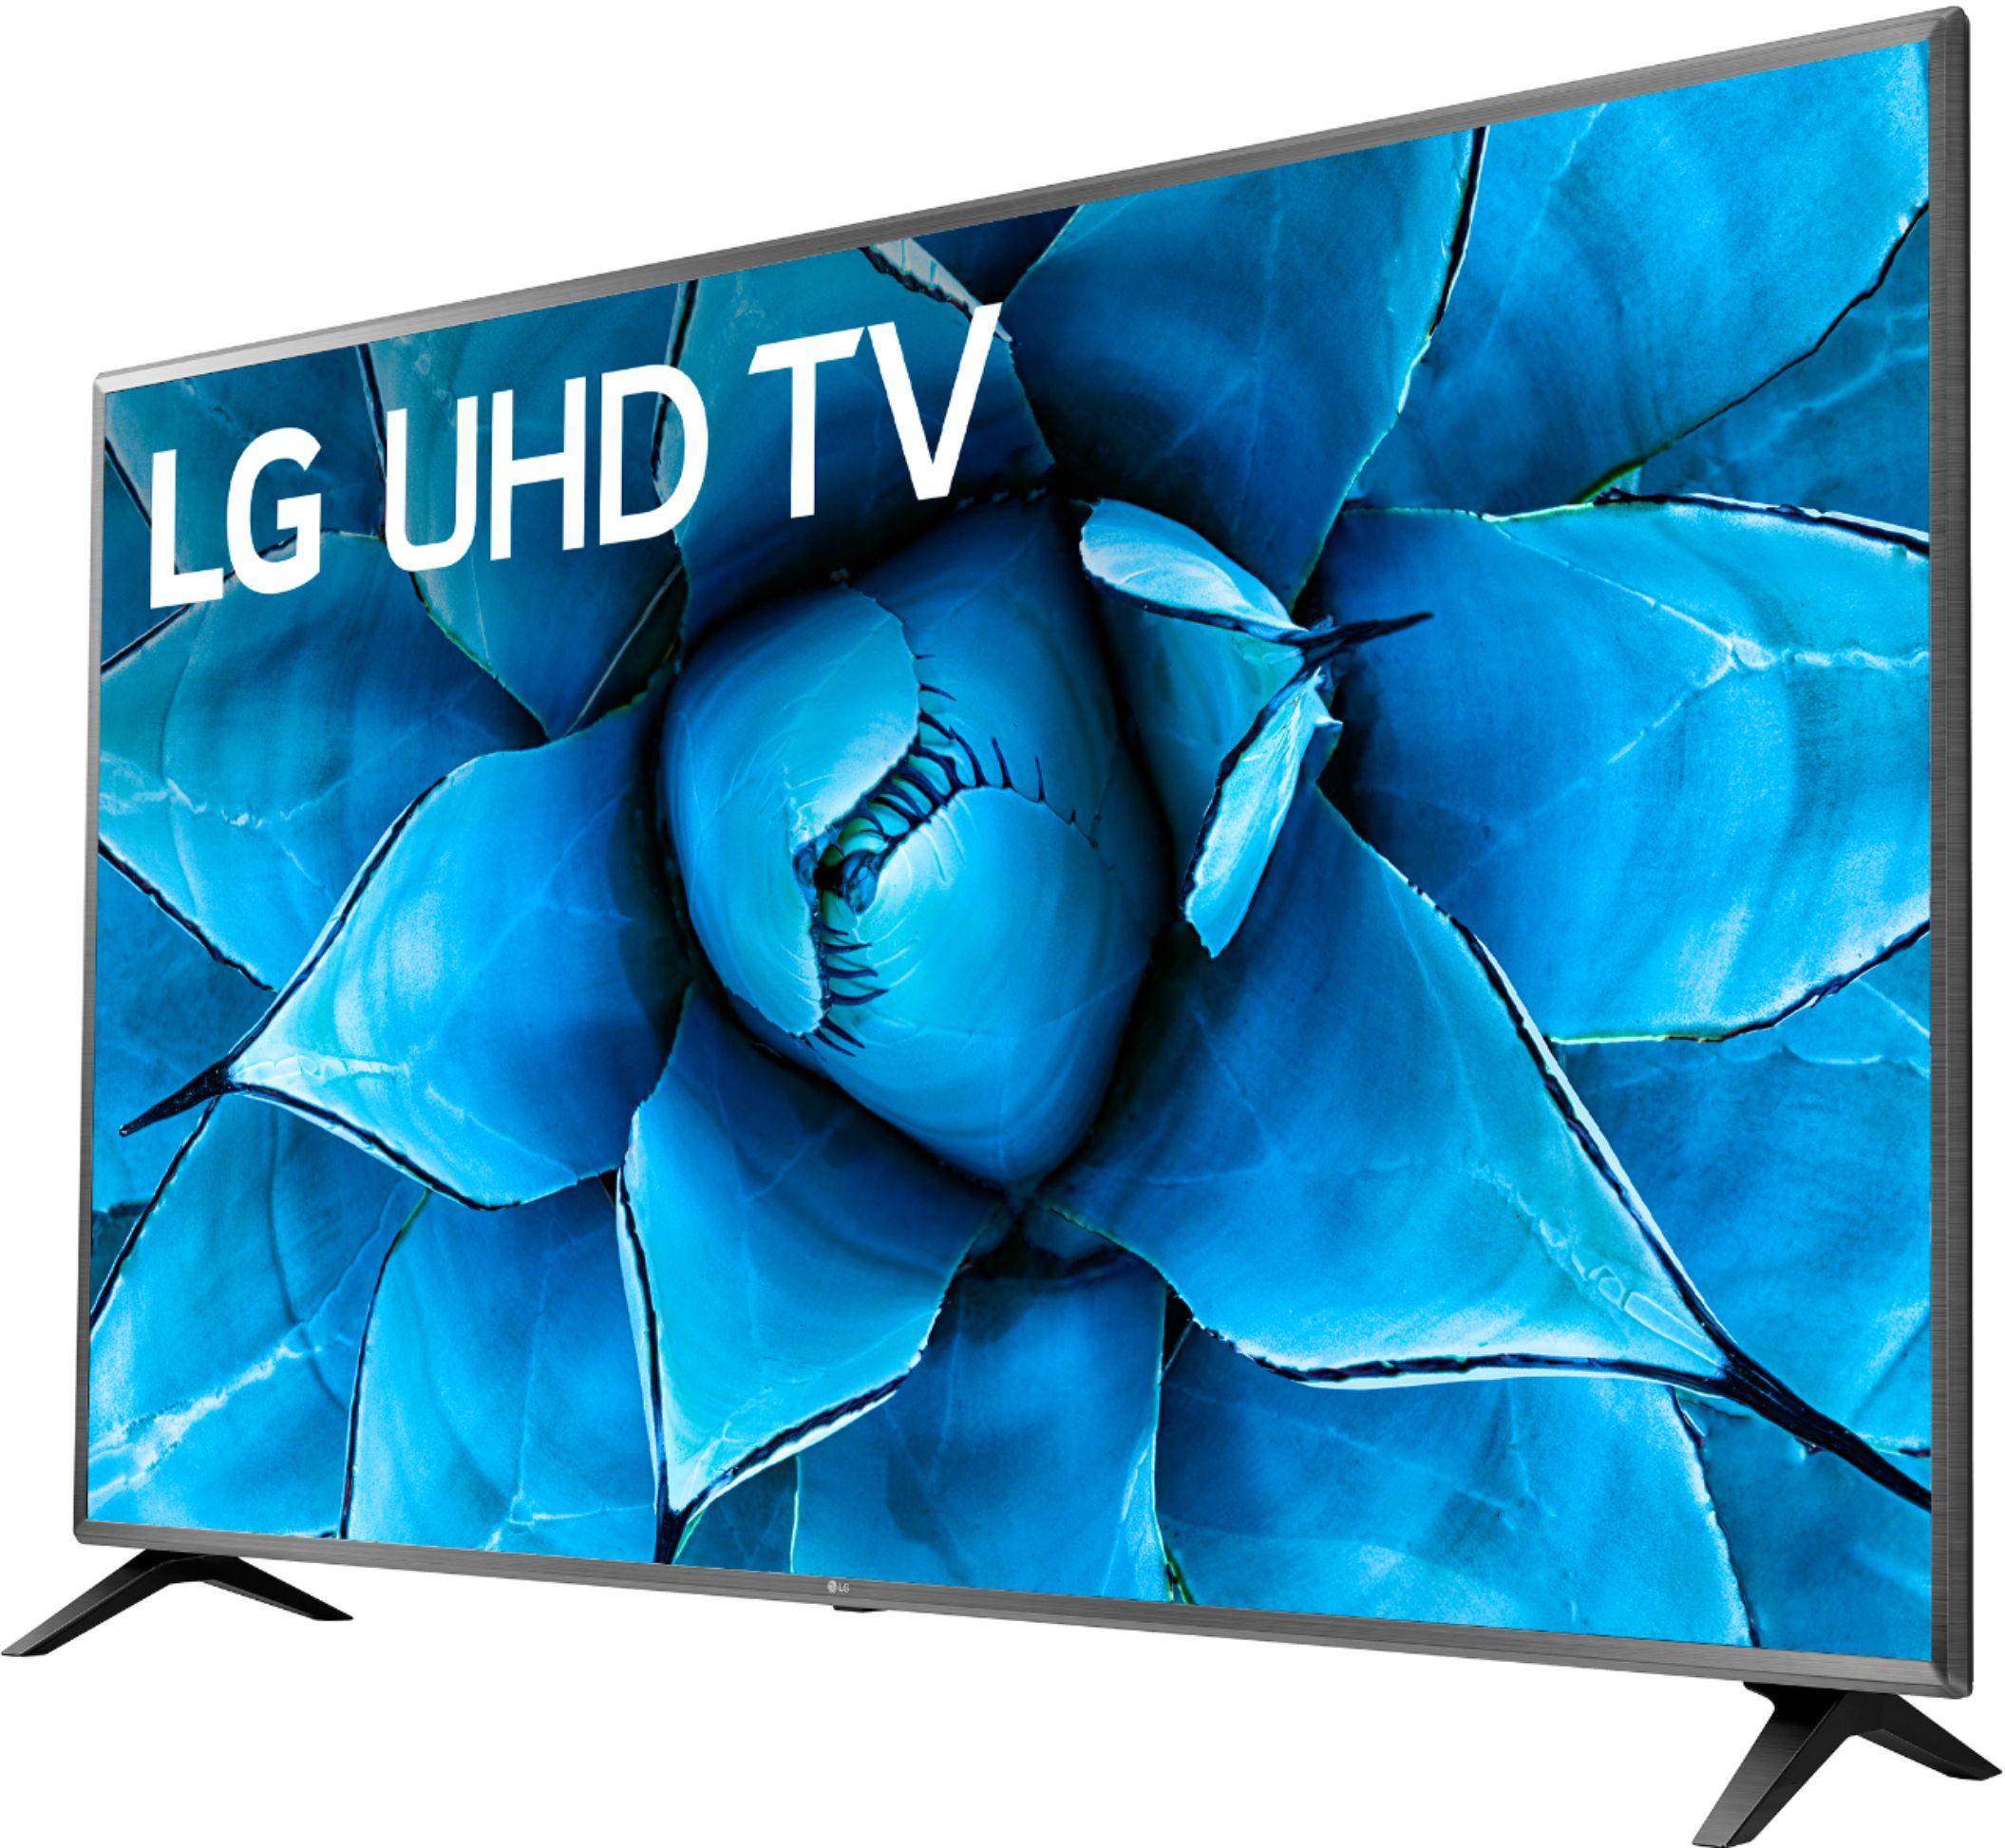 75in LG 75UN7370PUE 4K UHD Smart LED TV with $75 Gift Card for $799.99 Shipped